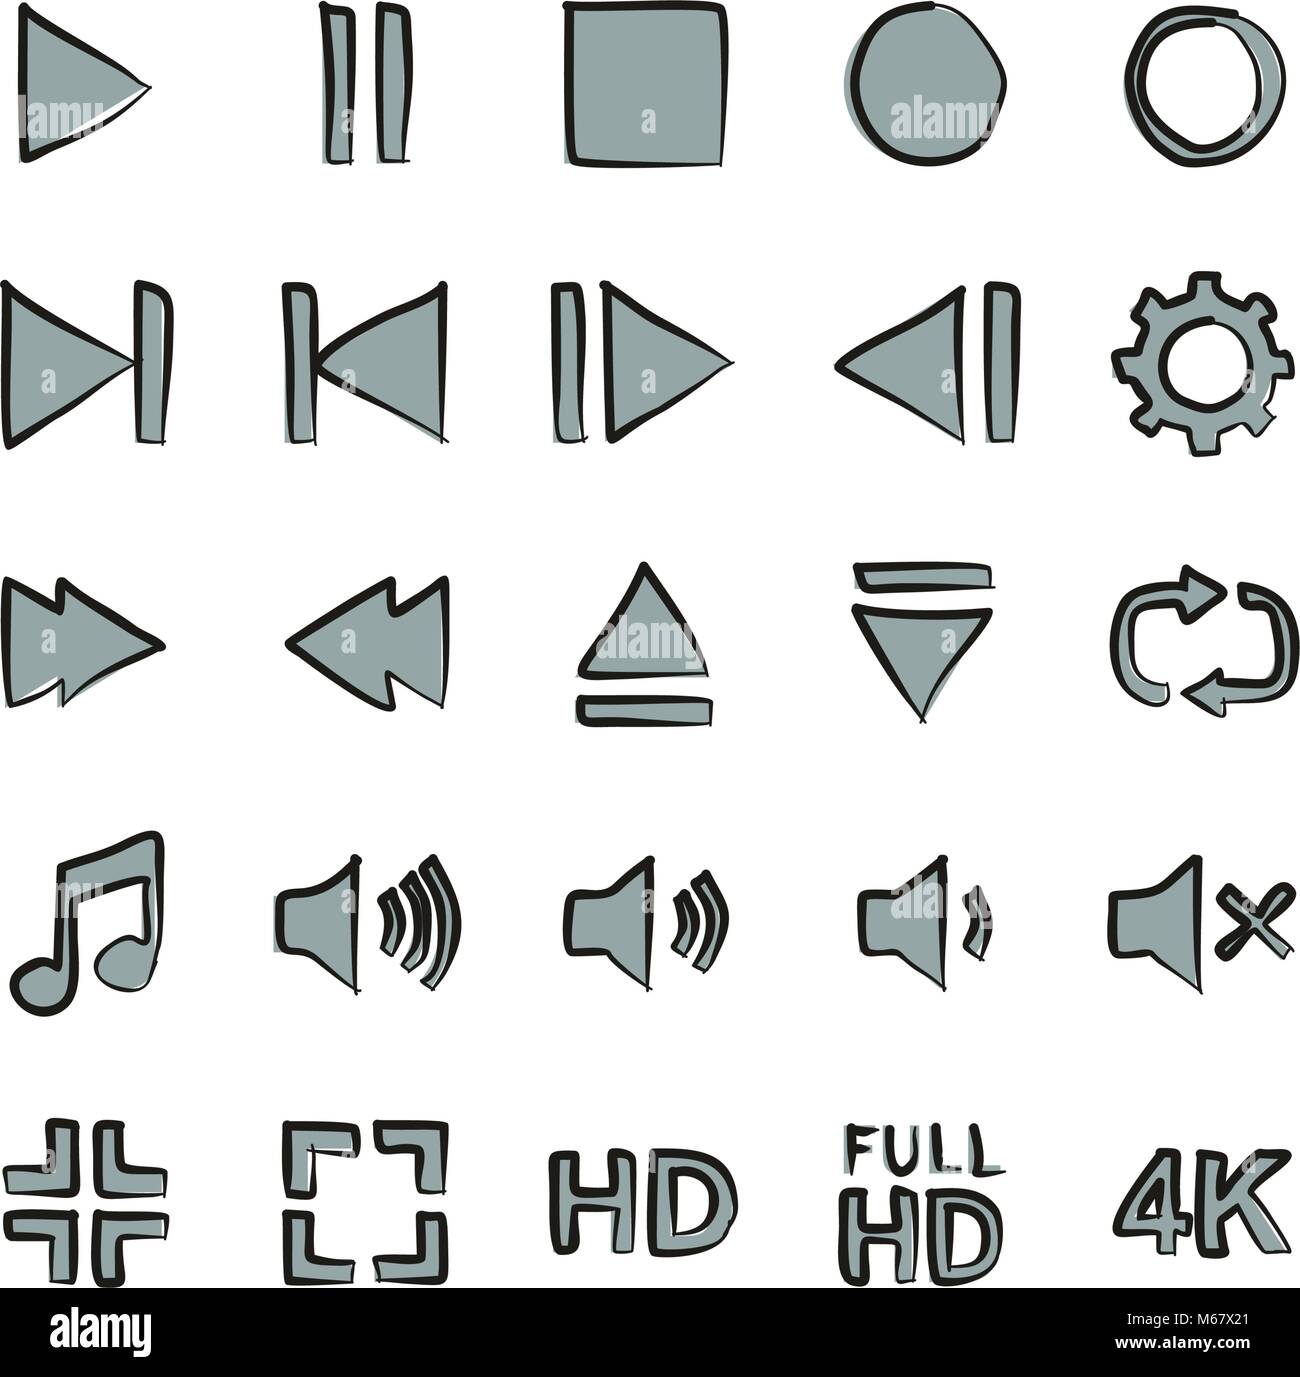 Video Or Music Or Camera Button Icons Freehand 2 Color Stock Vector